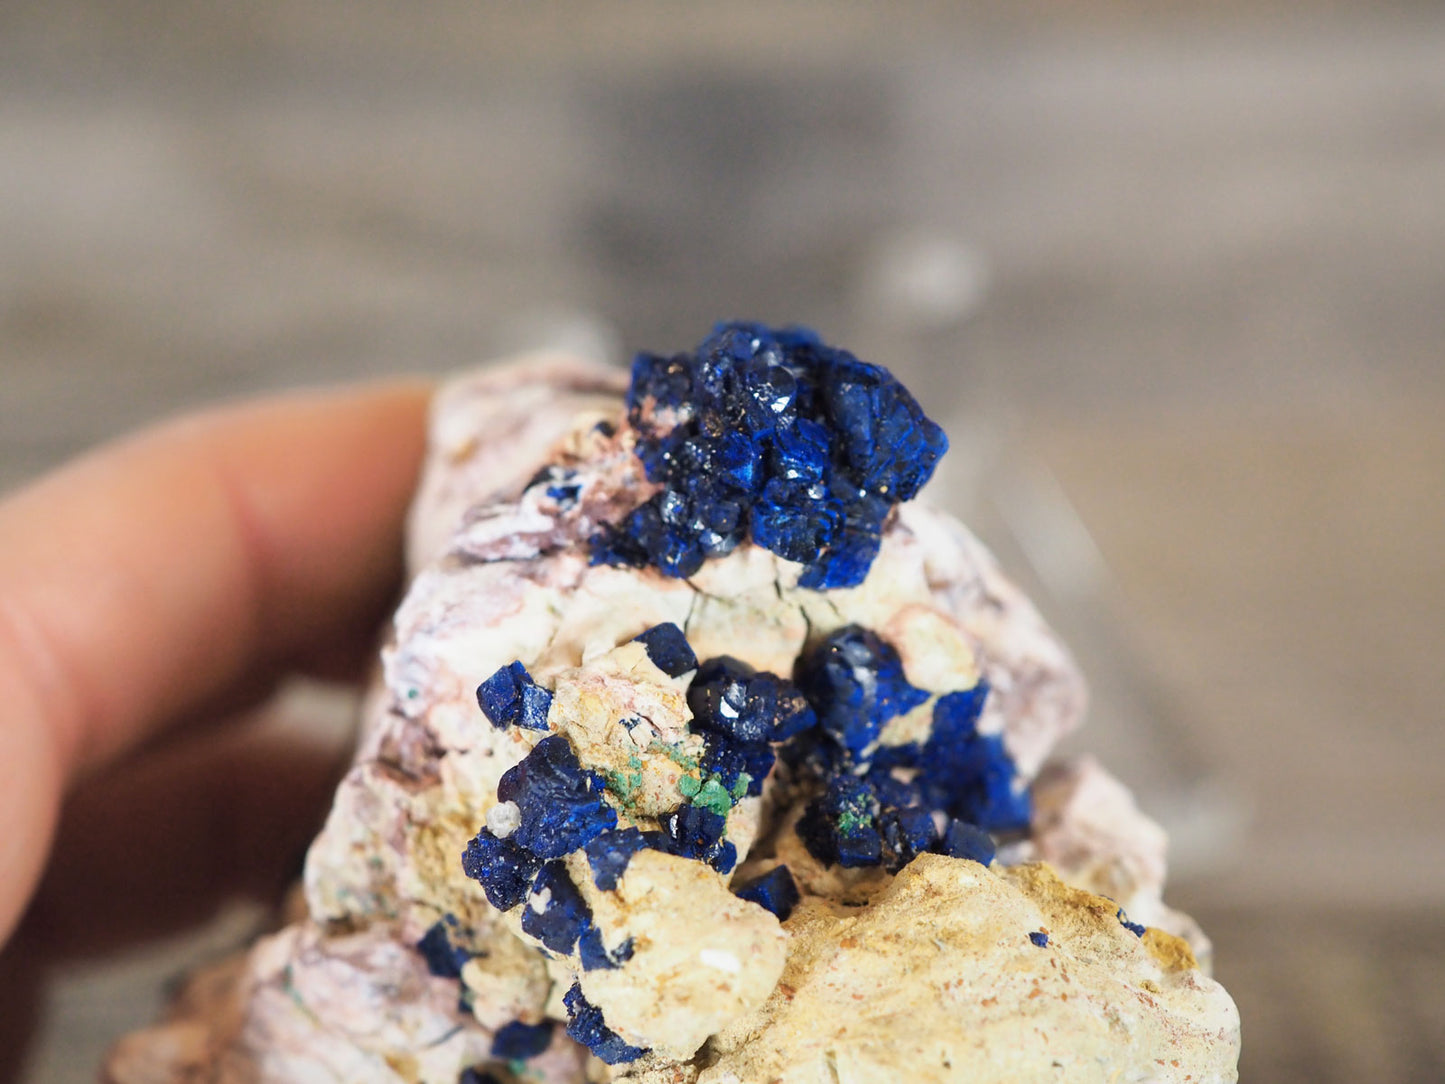 Sparkling 4" long Azurite Clusters in Matrix - Closeup in hand